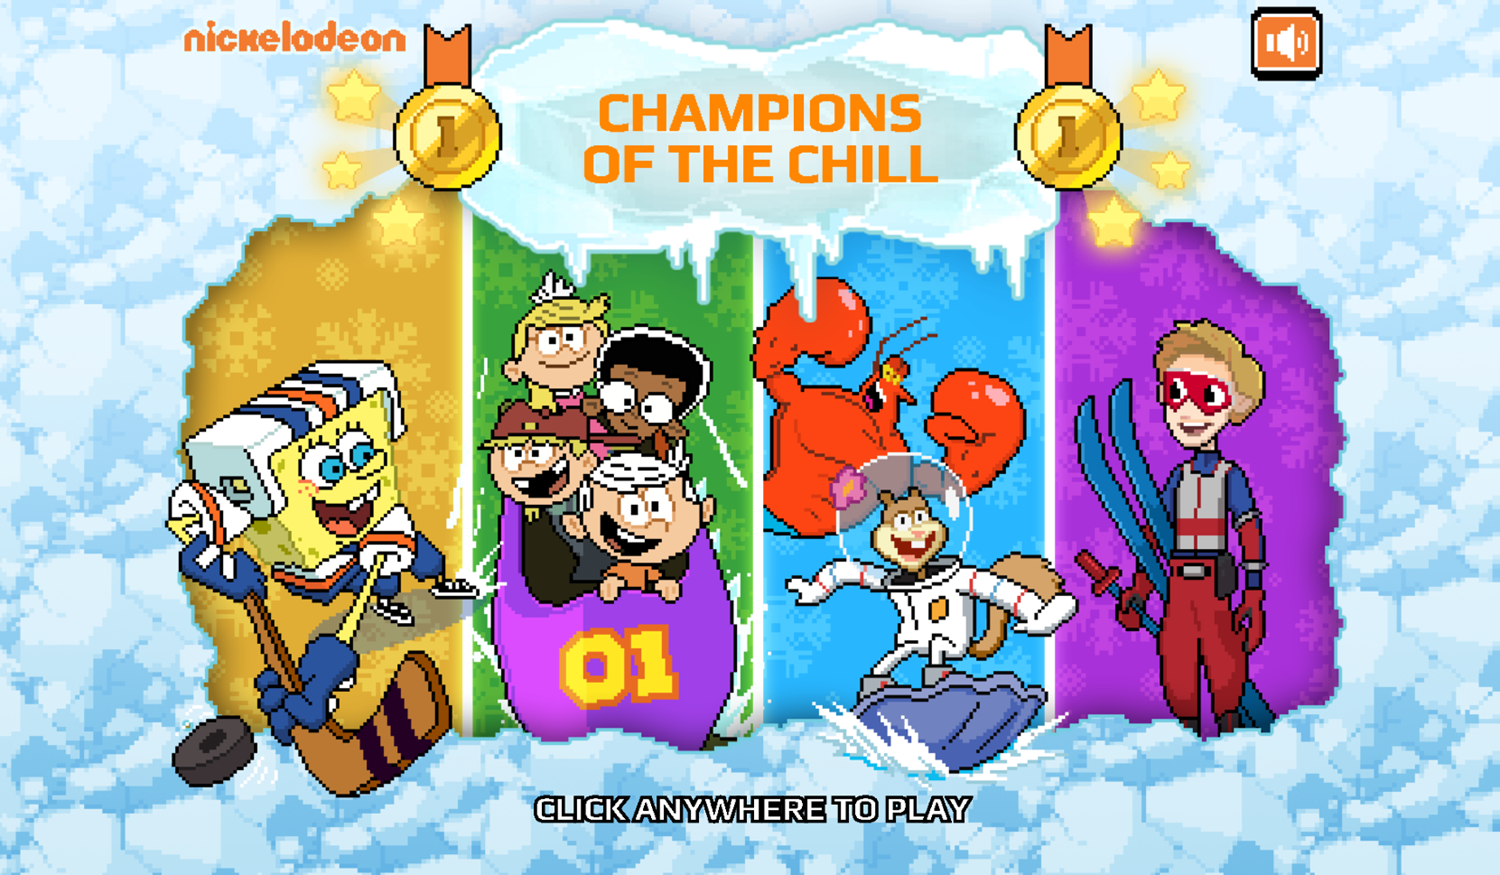 Nick Champions of the Chill 2 Game Welcome Screen Screenshot.